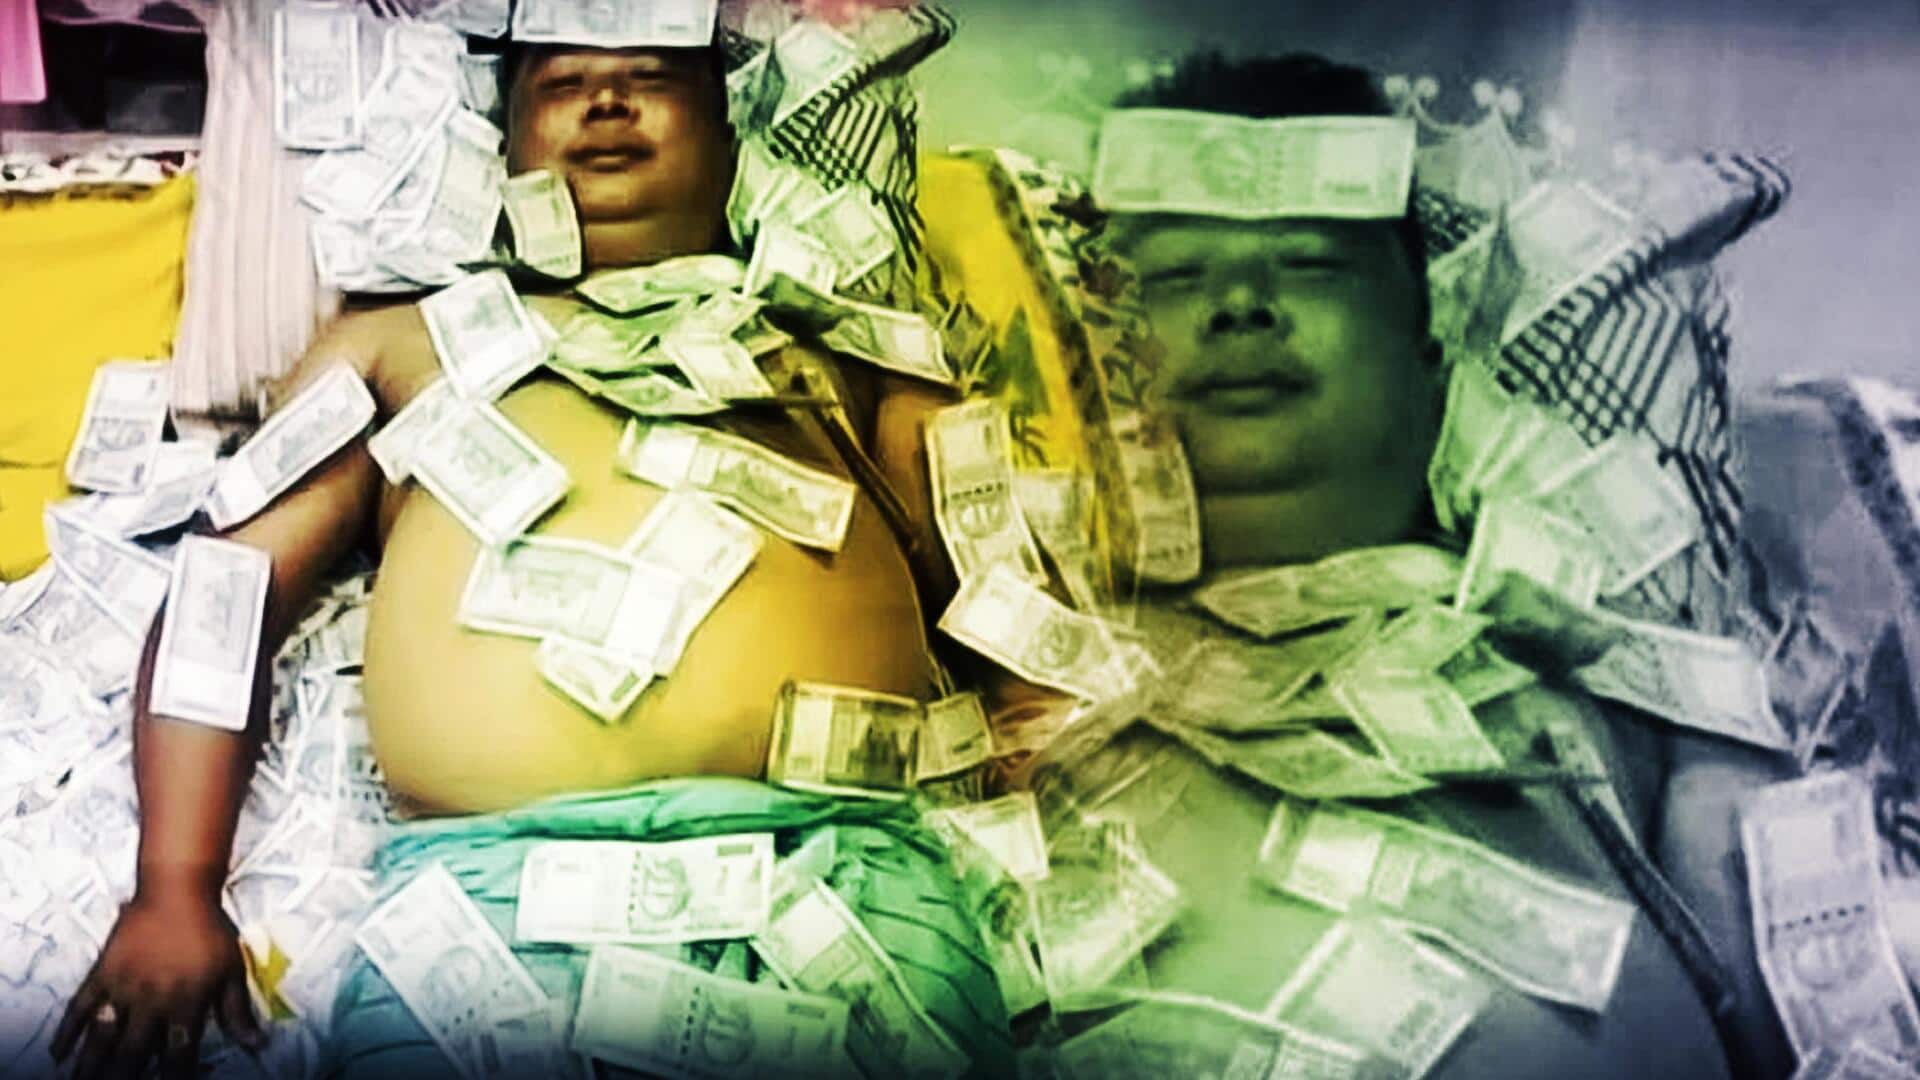 Assam: Corruption-accused politician's 'sleeping in cash' photo sparks outrage 